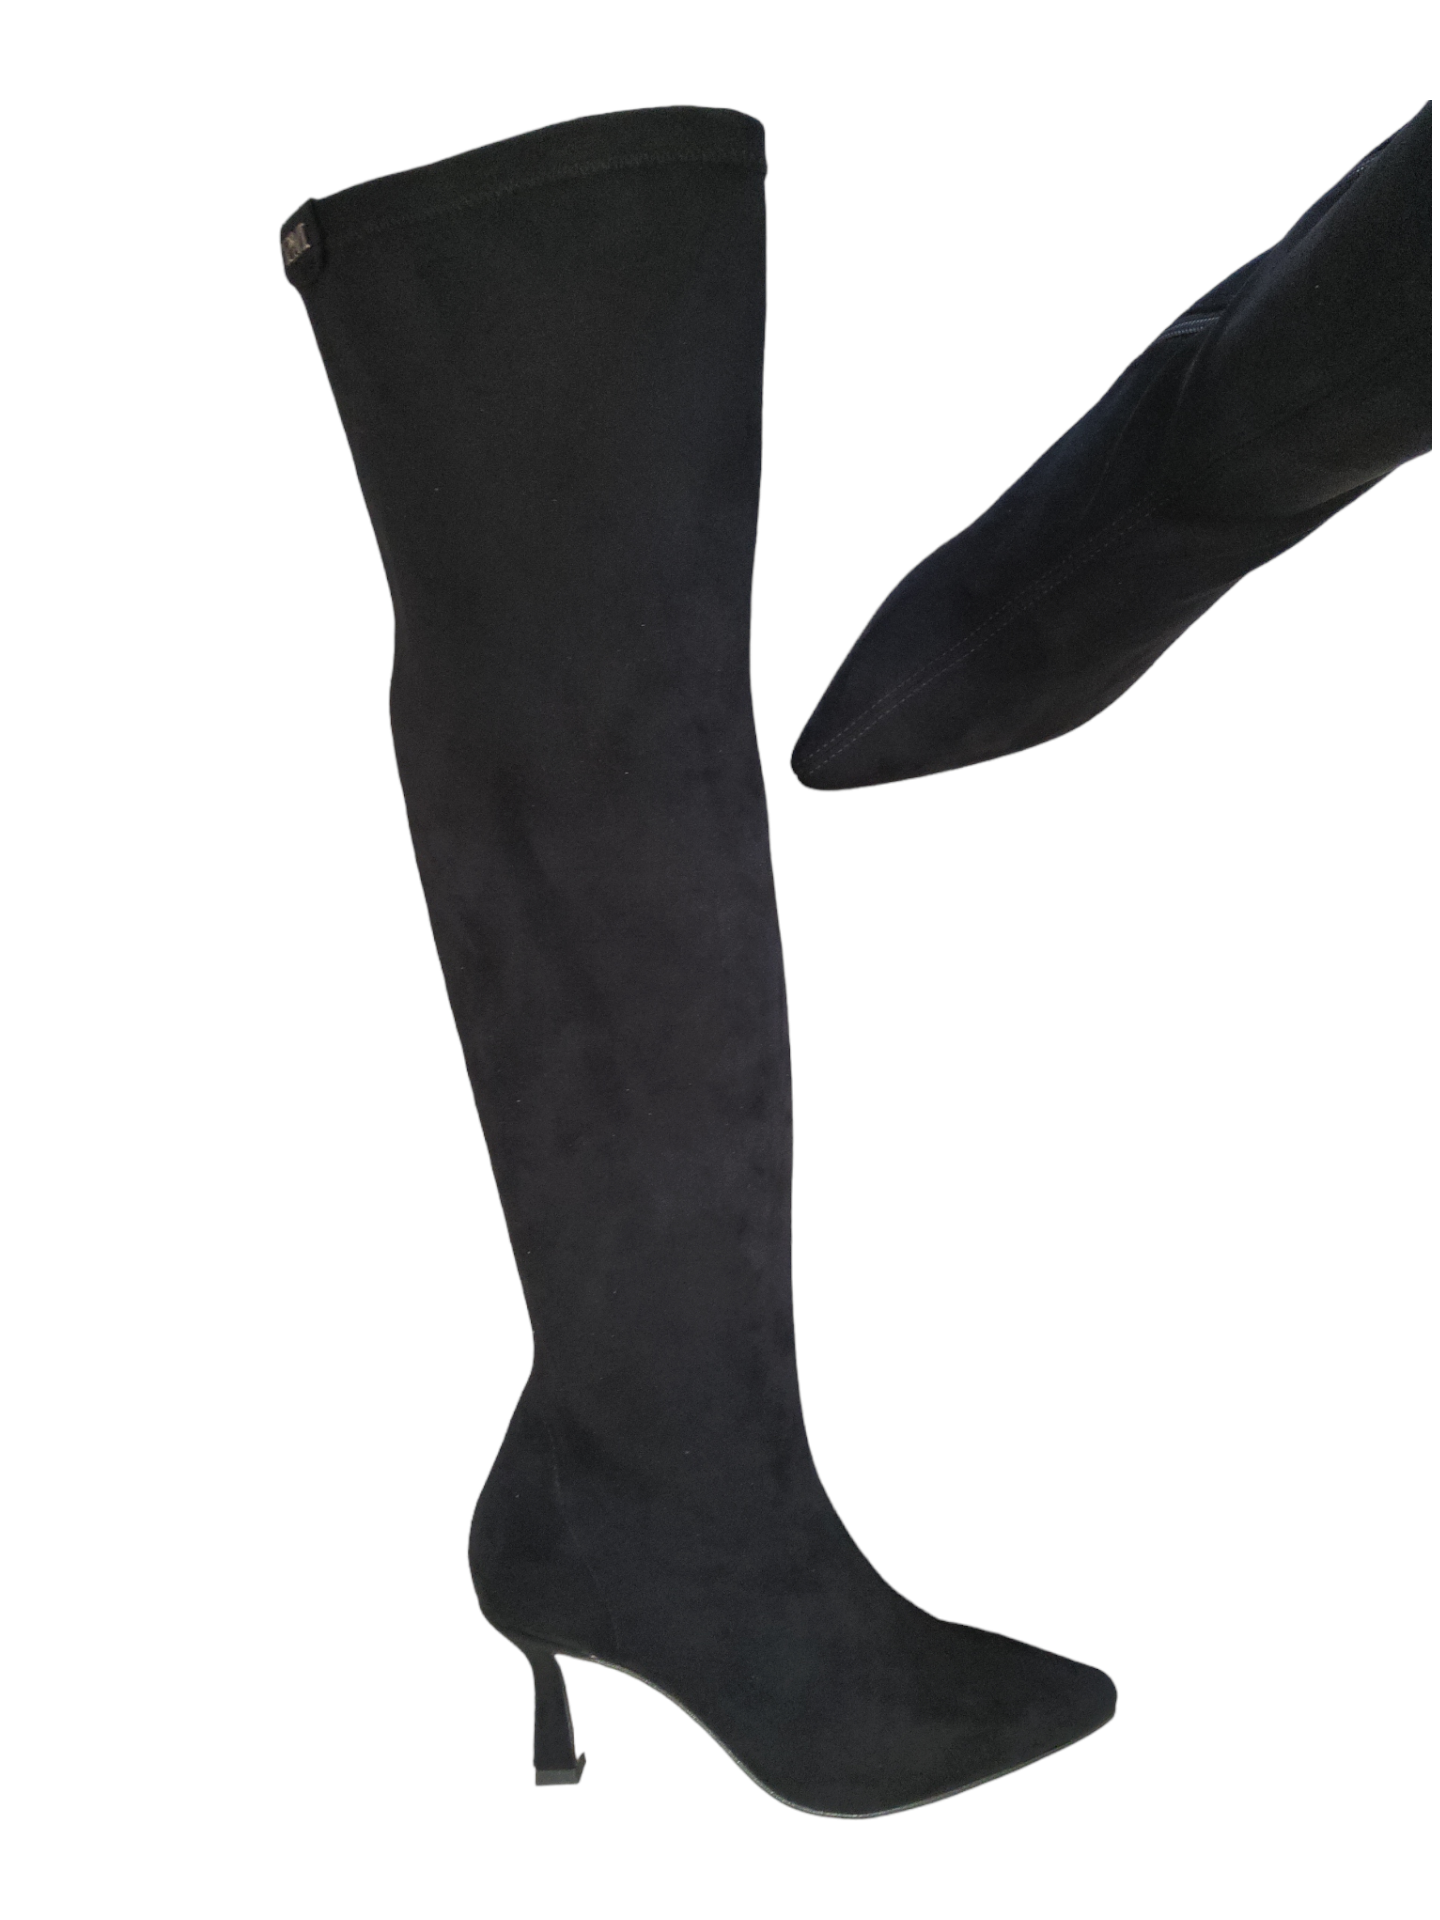 Black Over the knee boot